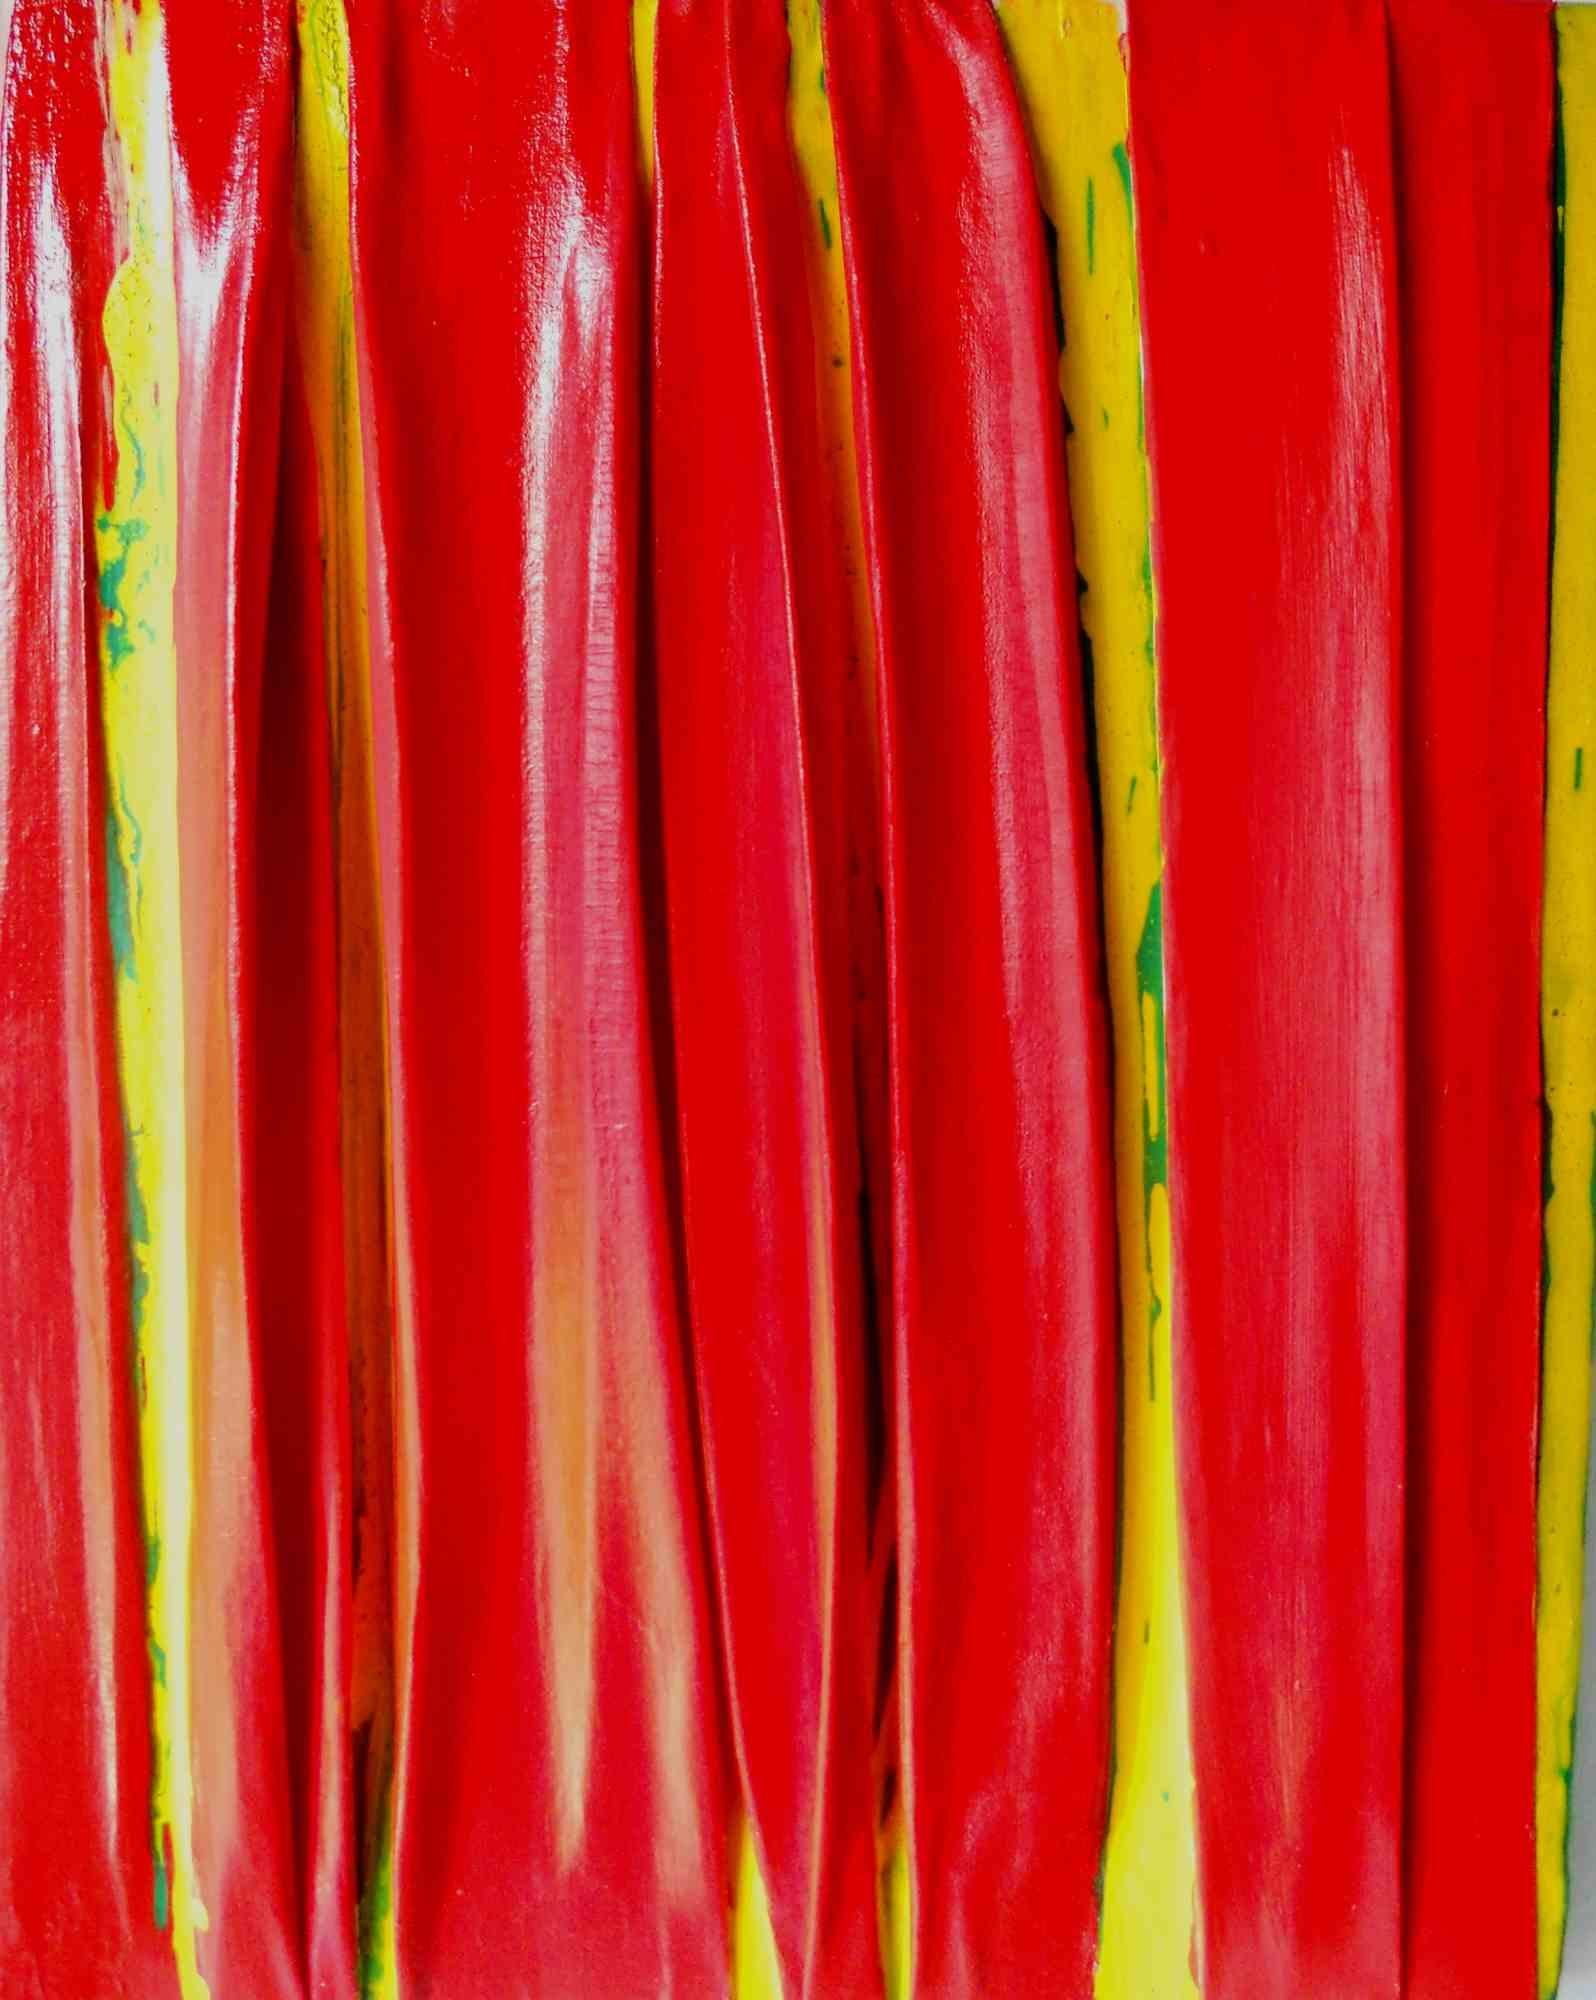 Red and Yellow Composition with some Green is one of the best works of the artist Giuseppe Zumbolo. It is made on canvas painted in acrilyc in 2021.

The work is made with acrylic colors on vertically folded canvas. The folds are not mechanical